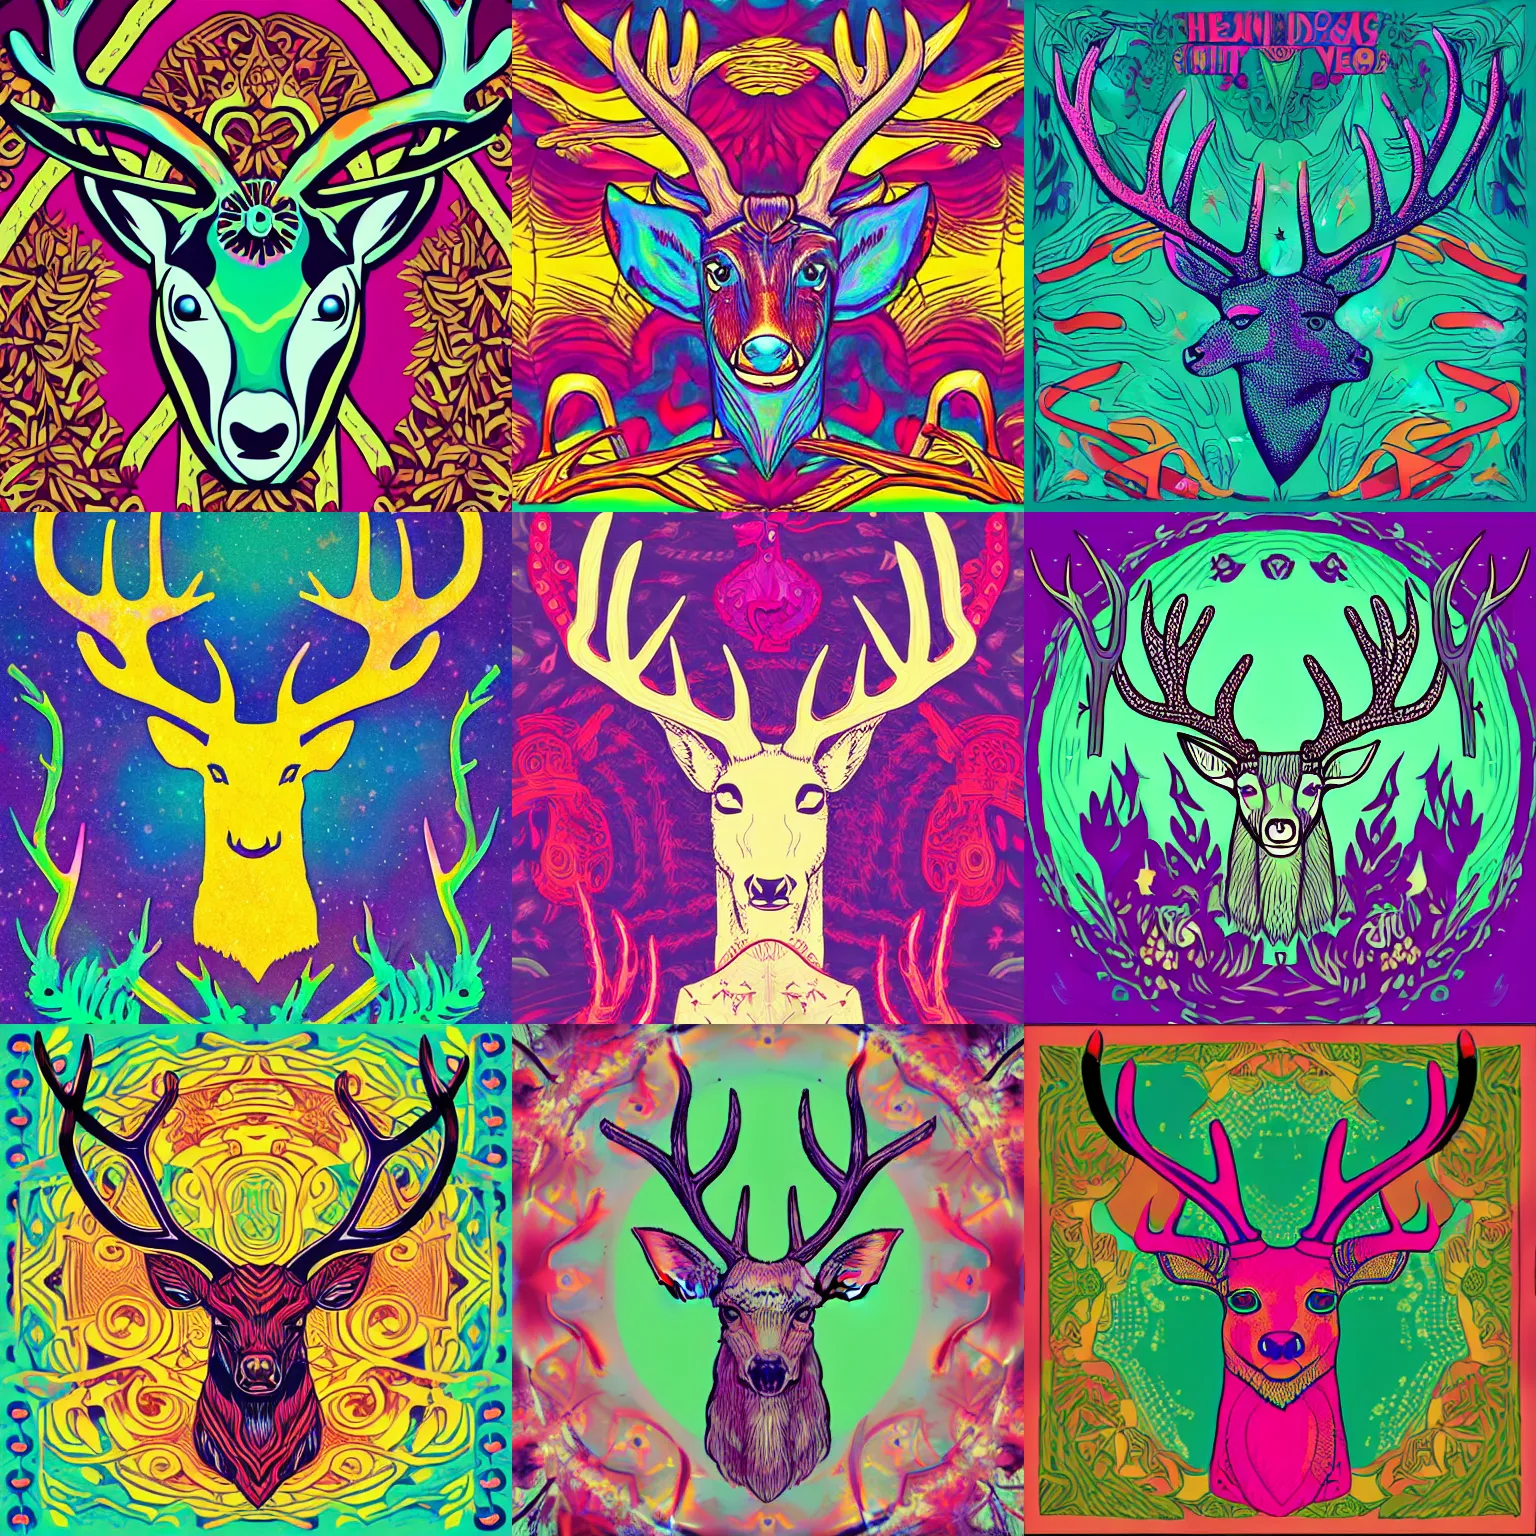 Prompt: An album cover of a stylized deer head and antlers, illustration with psychedelic undertones, mushroom motifs, logo, bottle label